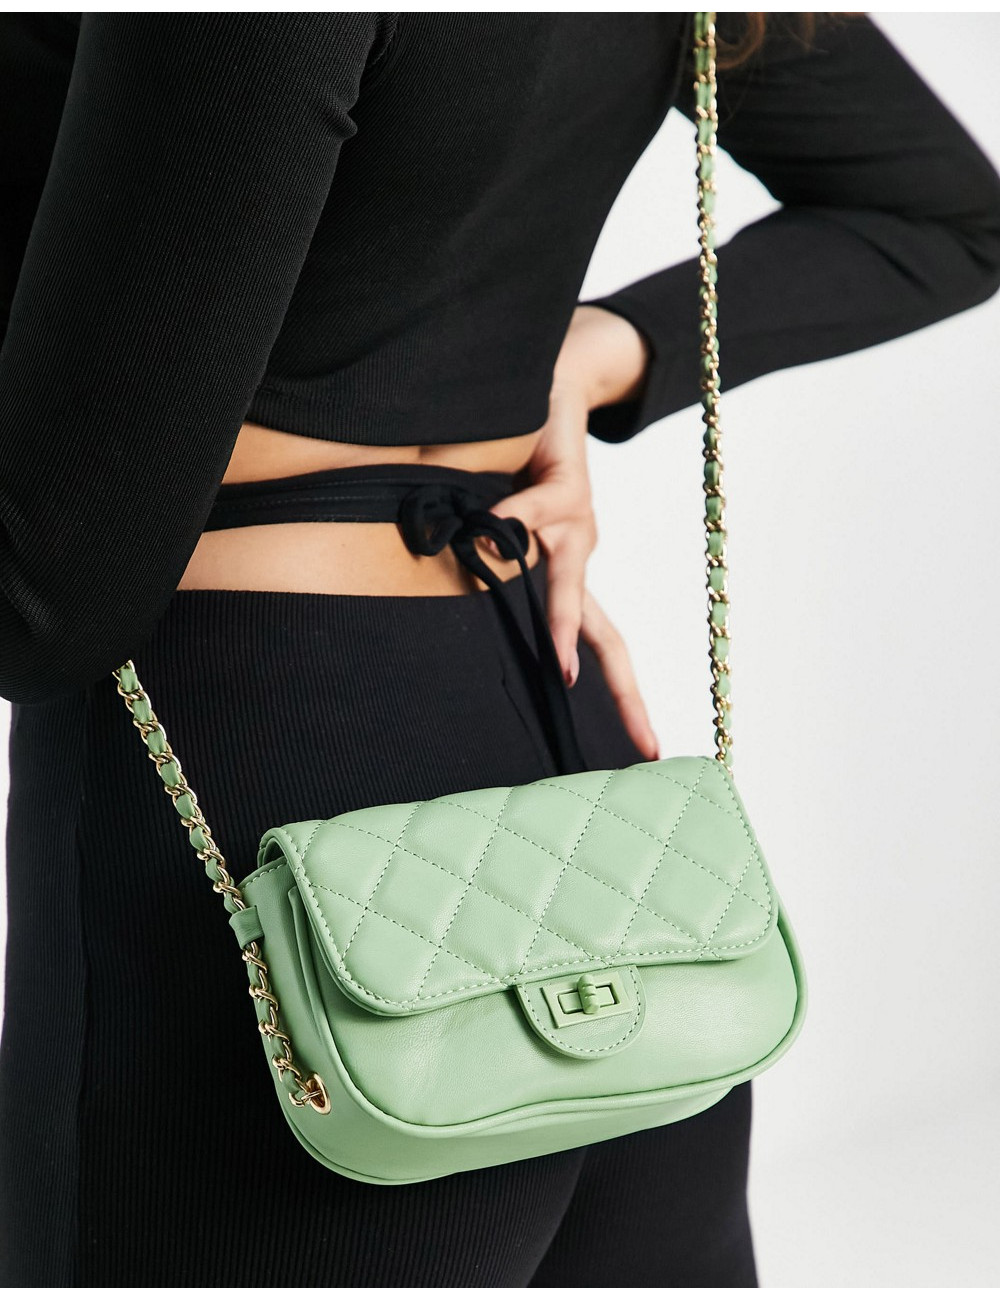 Ego foldover quilted bag in...